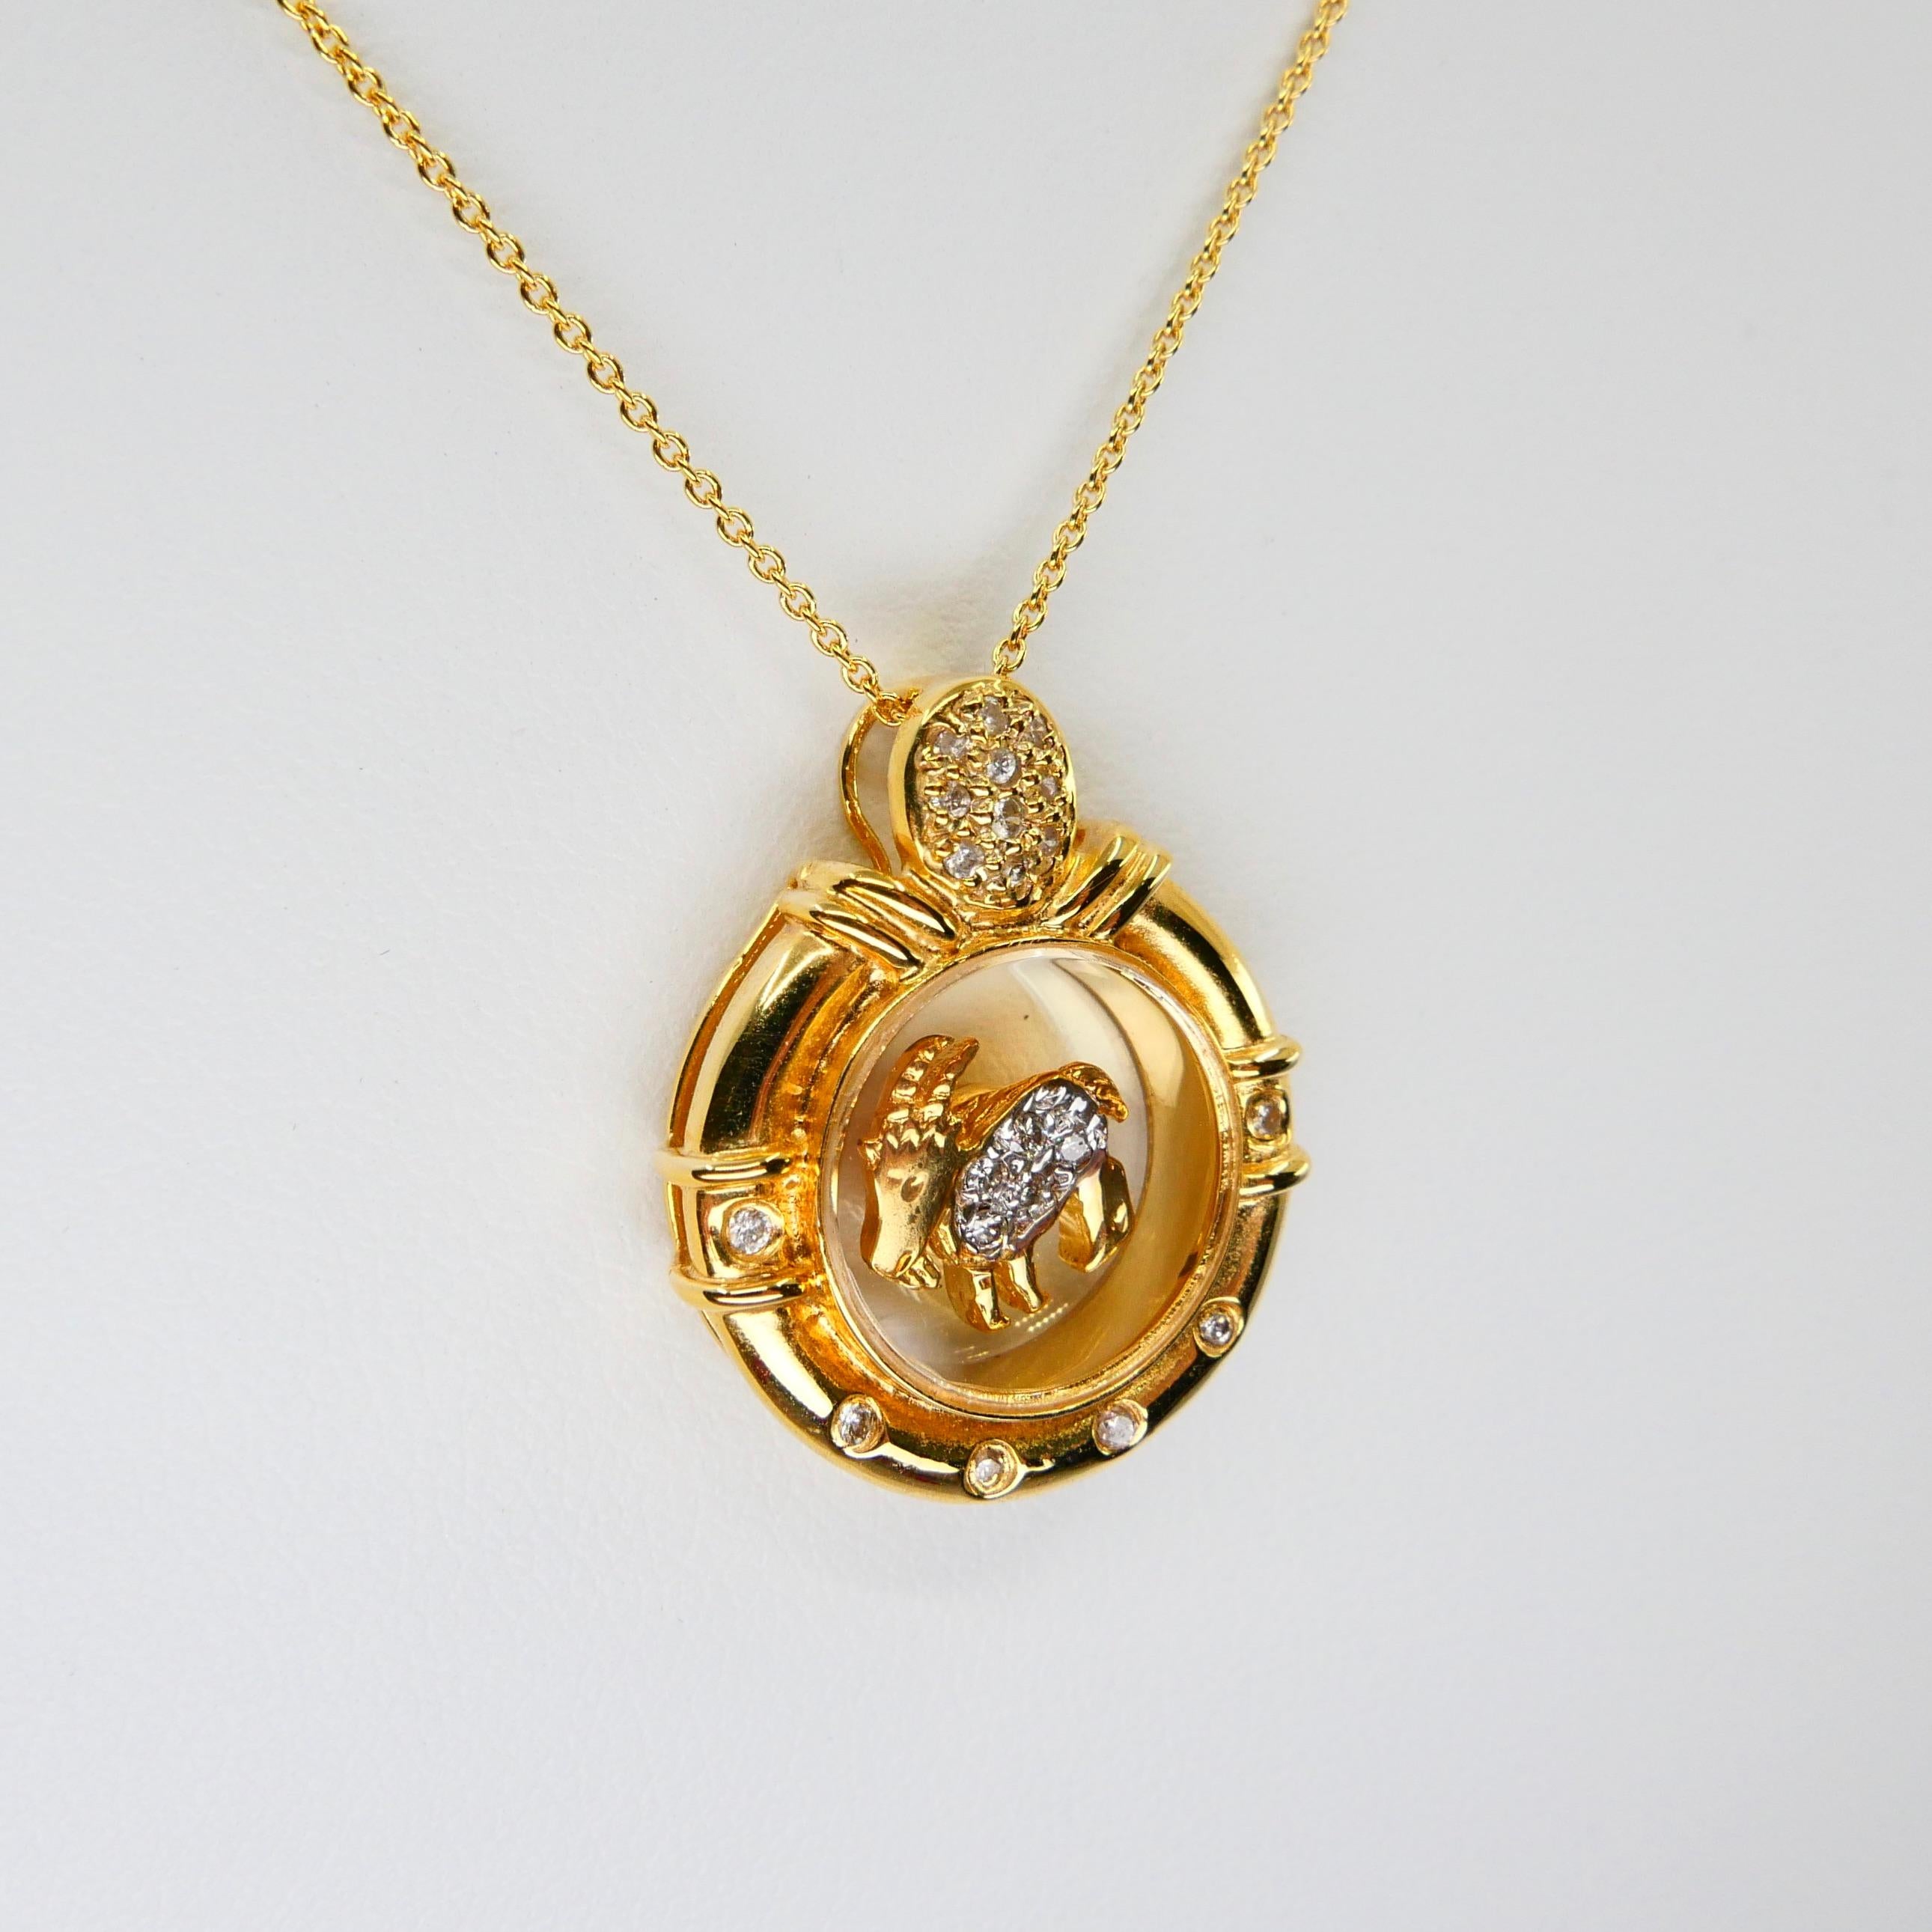 Women's or Men's 18 Karat Yellow Gold Spinning Goat Sheep Pendant. Chinese Zodiac Of The Sheep. For Sale